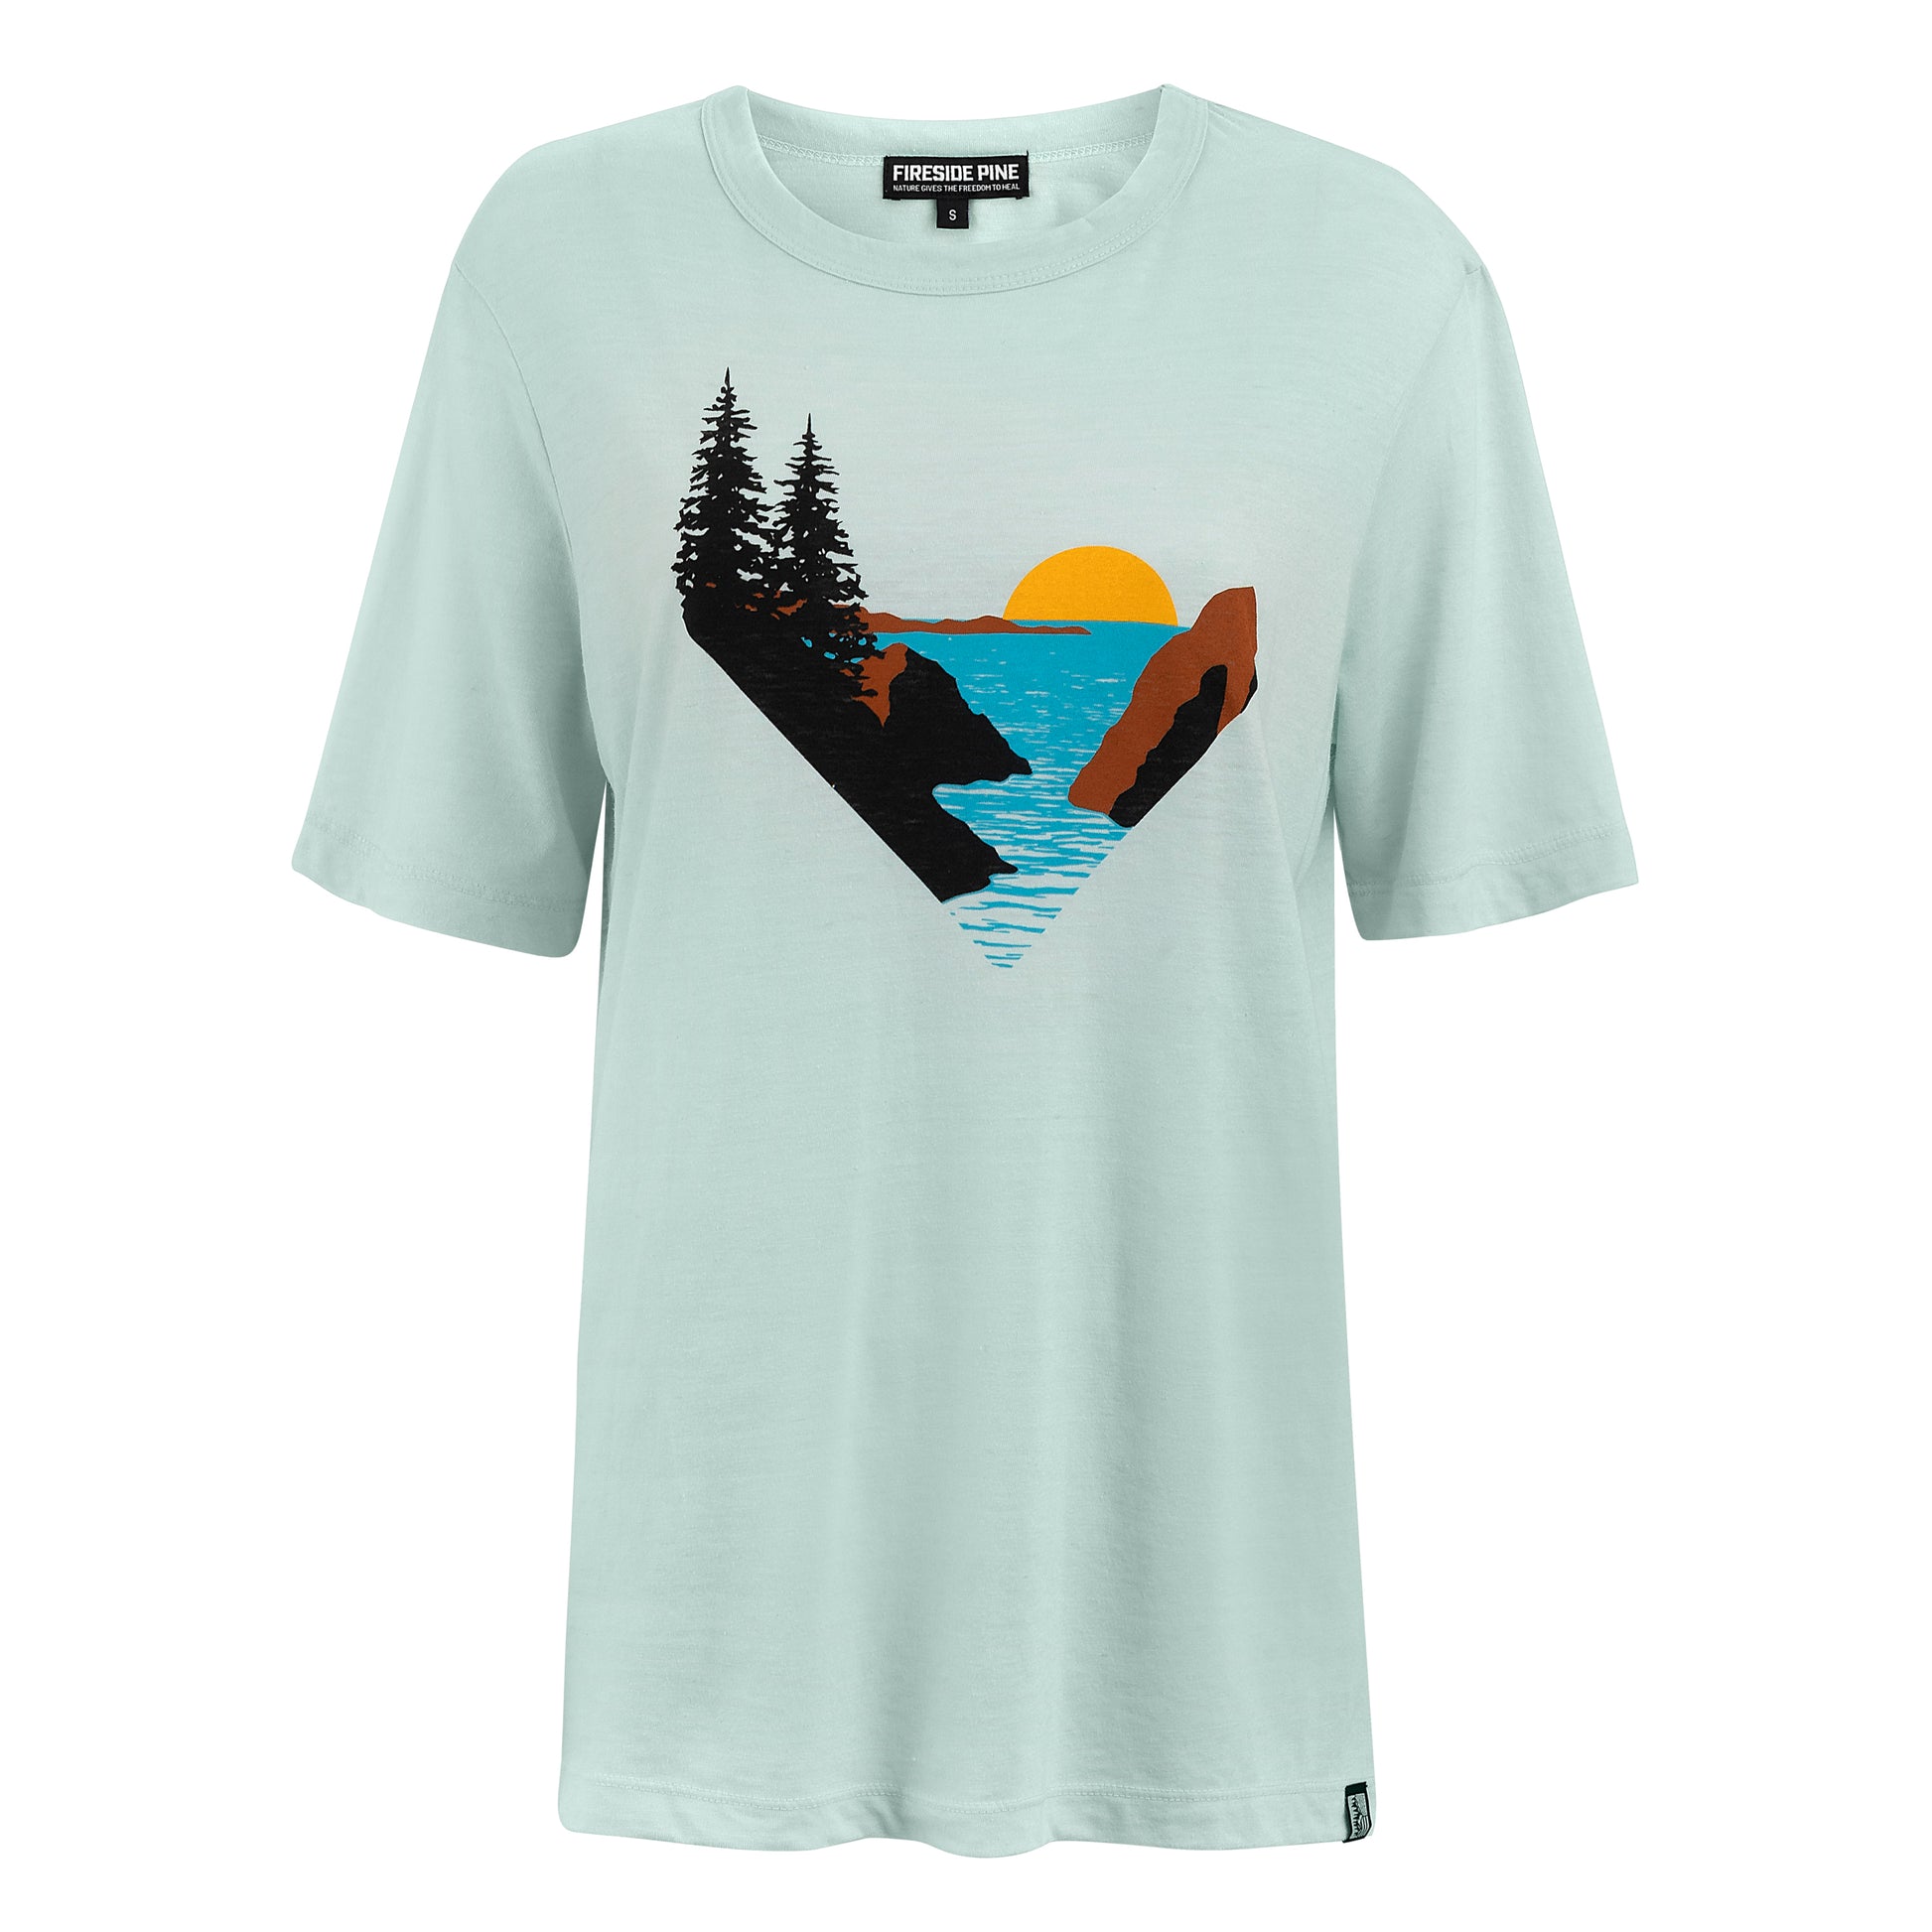 Made in the USA Oversize Fit T-Shirt. Made with a unique composition of 25% Modal, 50% Combed Cotton, and 25% Polyester, this shirt offers a luxurious feel with enhanced resilience. This sky blue short sleeve features a Pacific Ocean coastline graphic. Inspired by the Pacific North West. Front View.